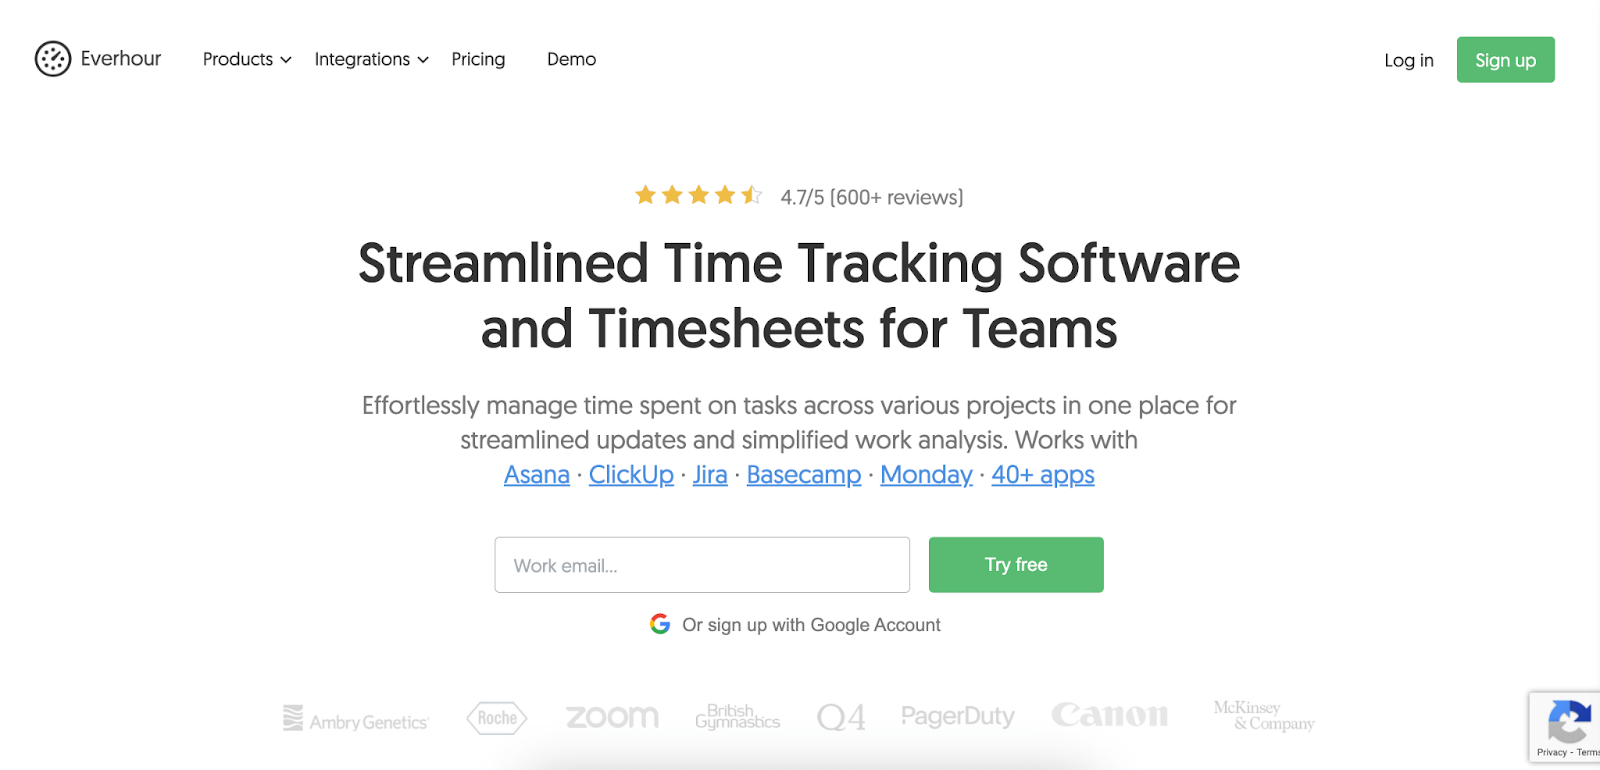 Best time tracking apps: Everhour